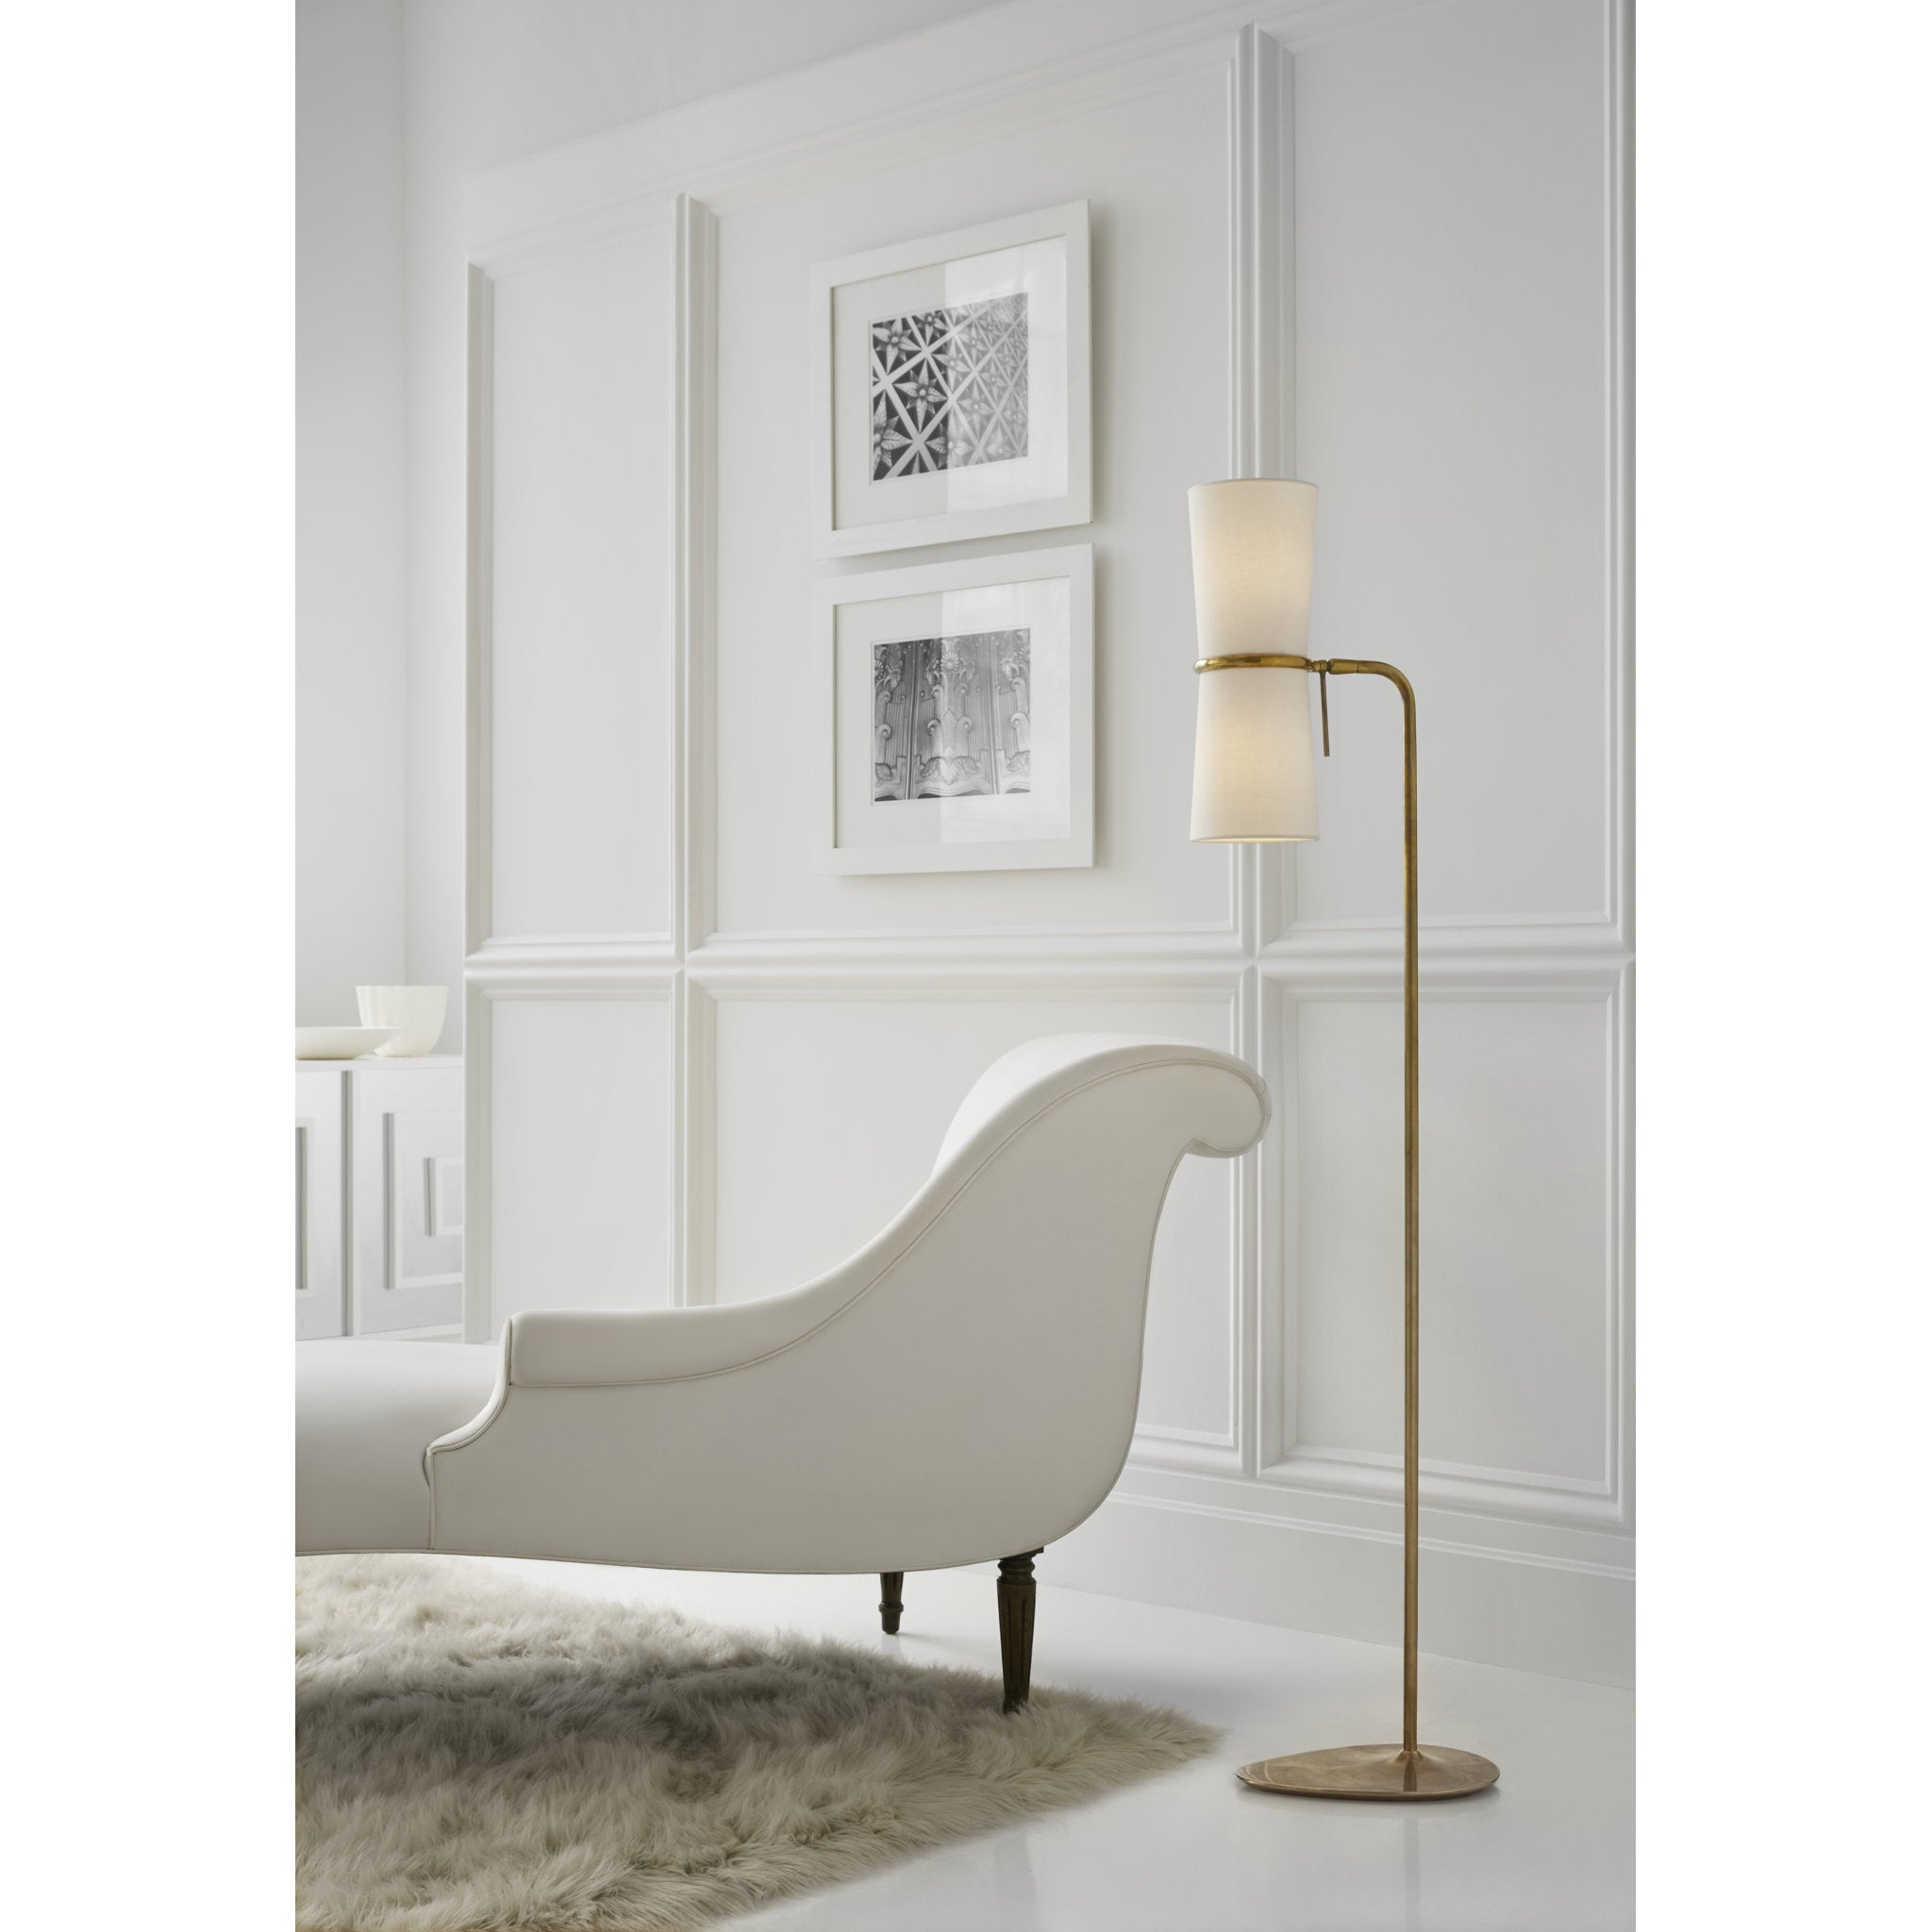 AERIN Clarkson Floor Lamp in Hand-Rubbed Antique Brass with Linen Shades